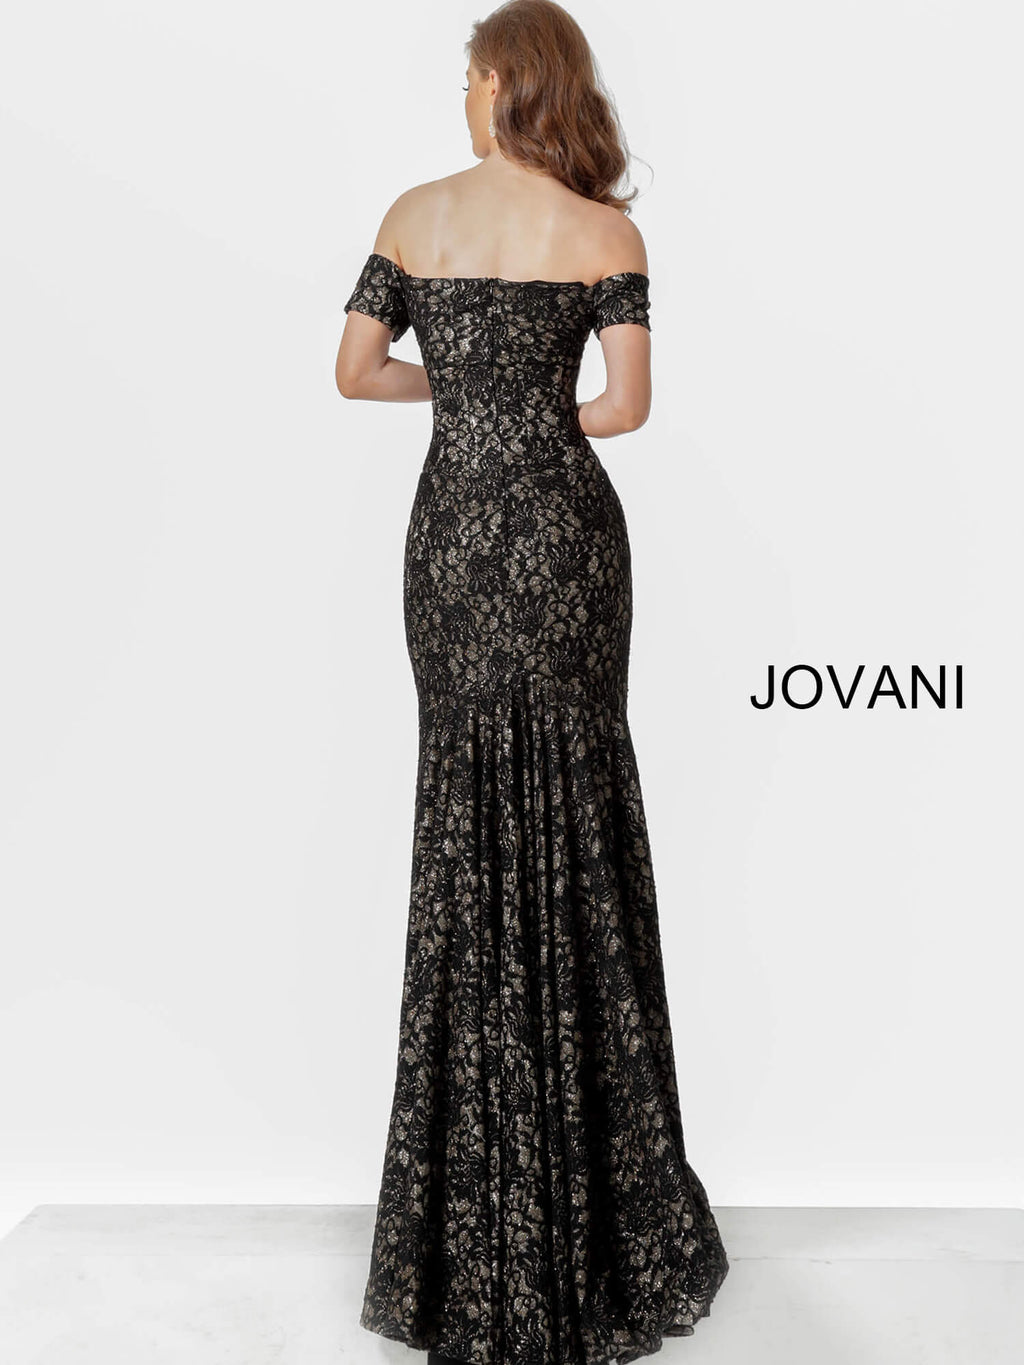 JOVANI 66305 Off the Shoulder Fitted Lace Evening Dress - CYC Boutique